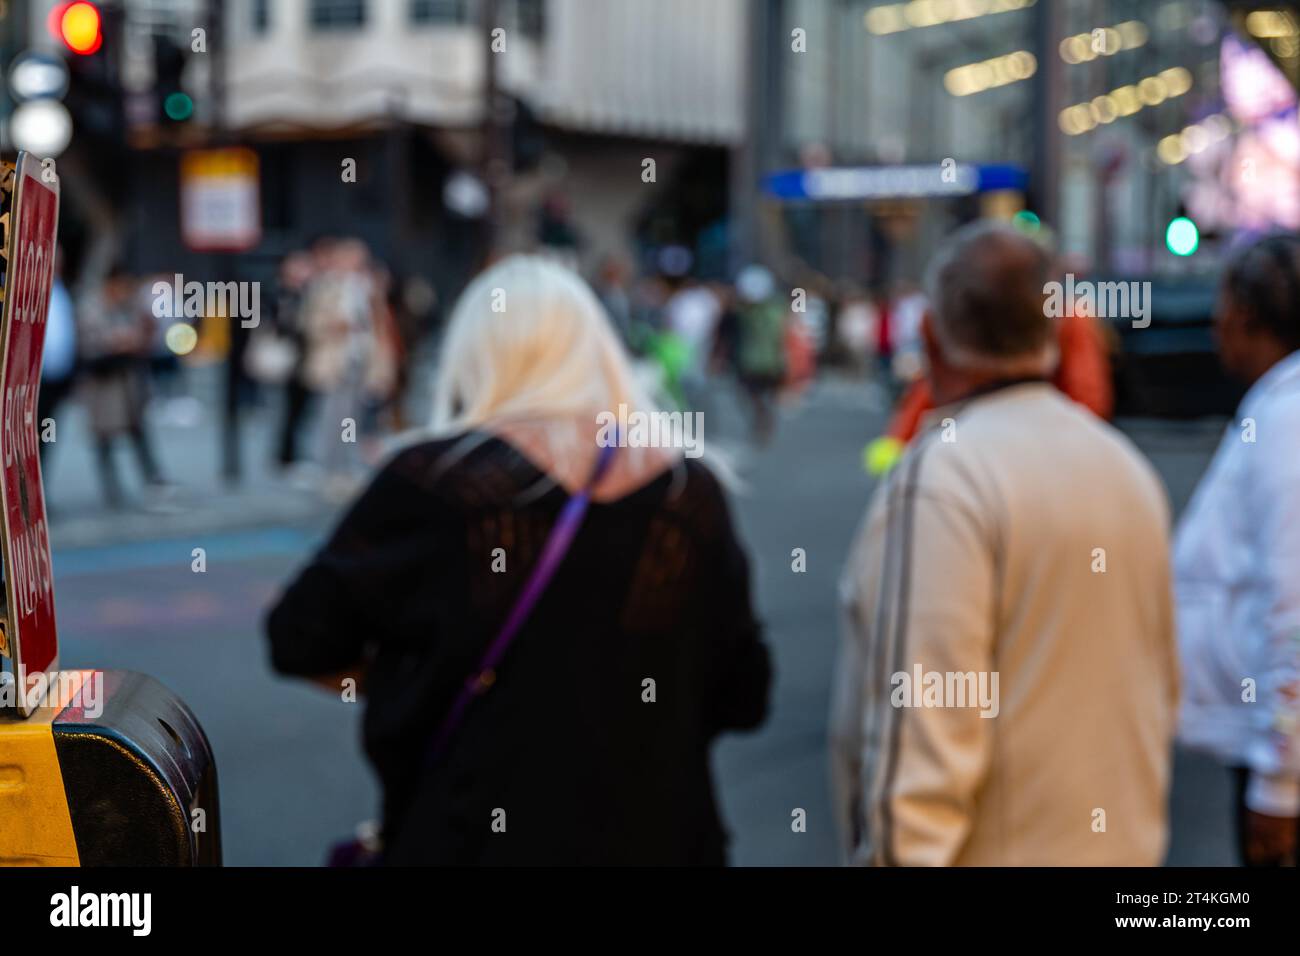 Some pedestrians are waiting to cross New Oxford Street in the London Borough of Camden, UK. Stock Photo